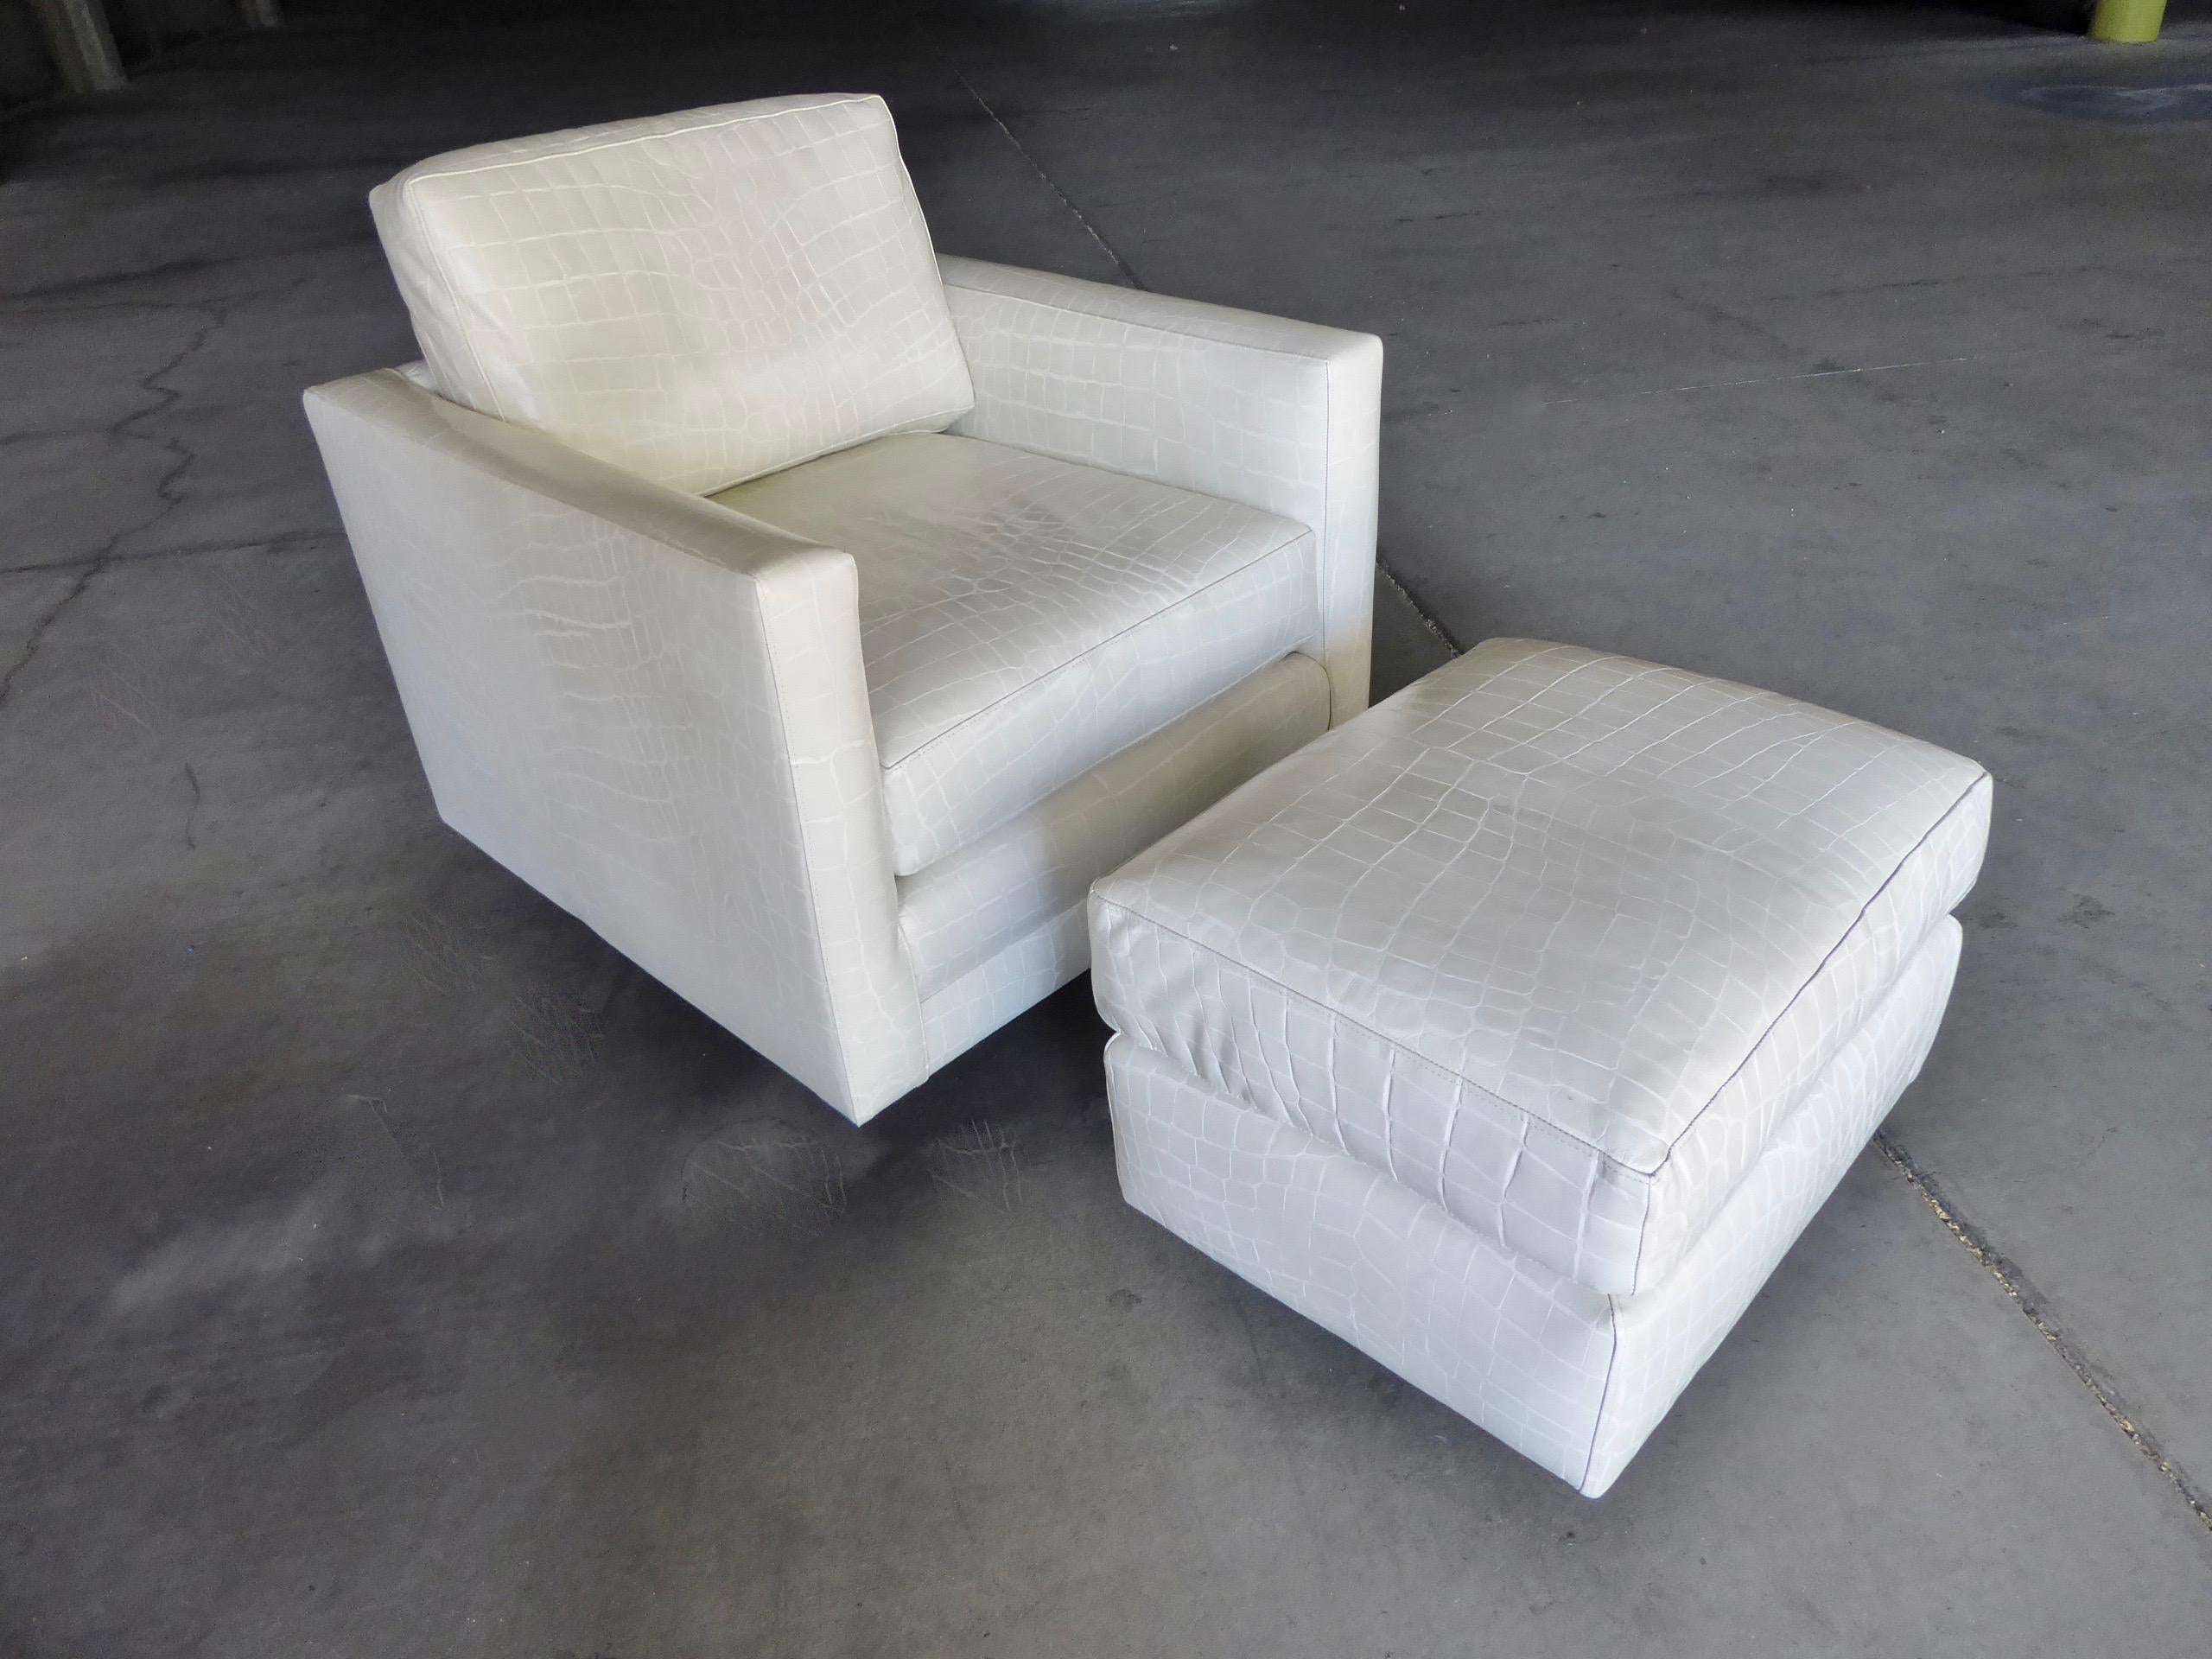 A super comfortable and stylish swiveling club chair and ottoman in the style of Milo Baughman. This chair was recently upholstered with an alligator pattern embossed high quality leather. Dimensions provided for listing are for the chair alone.